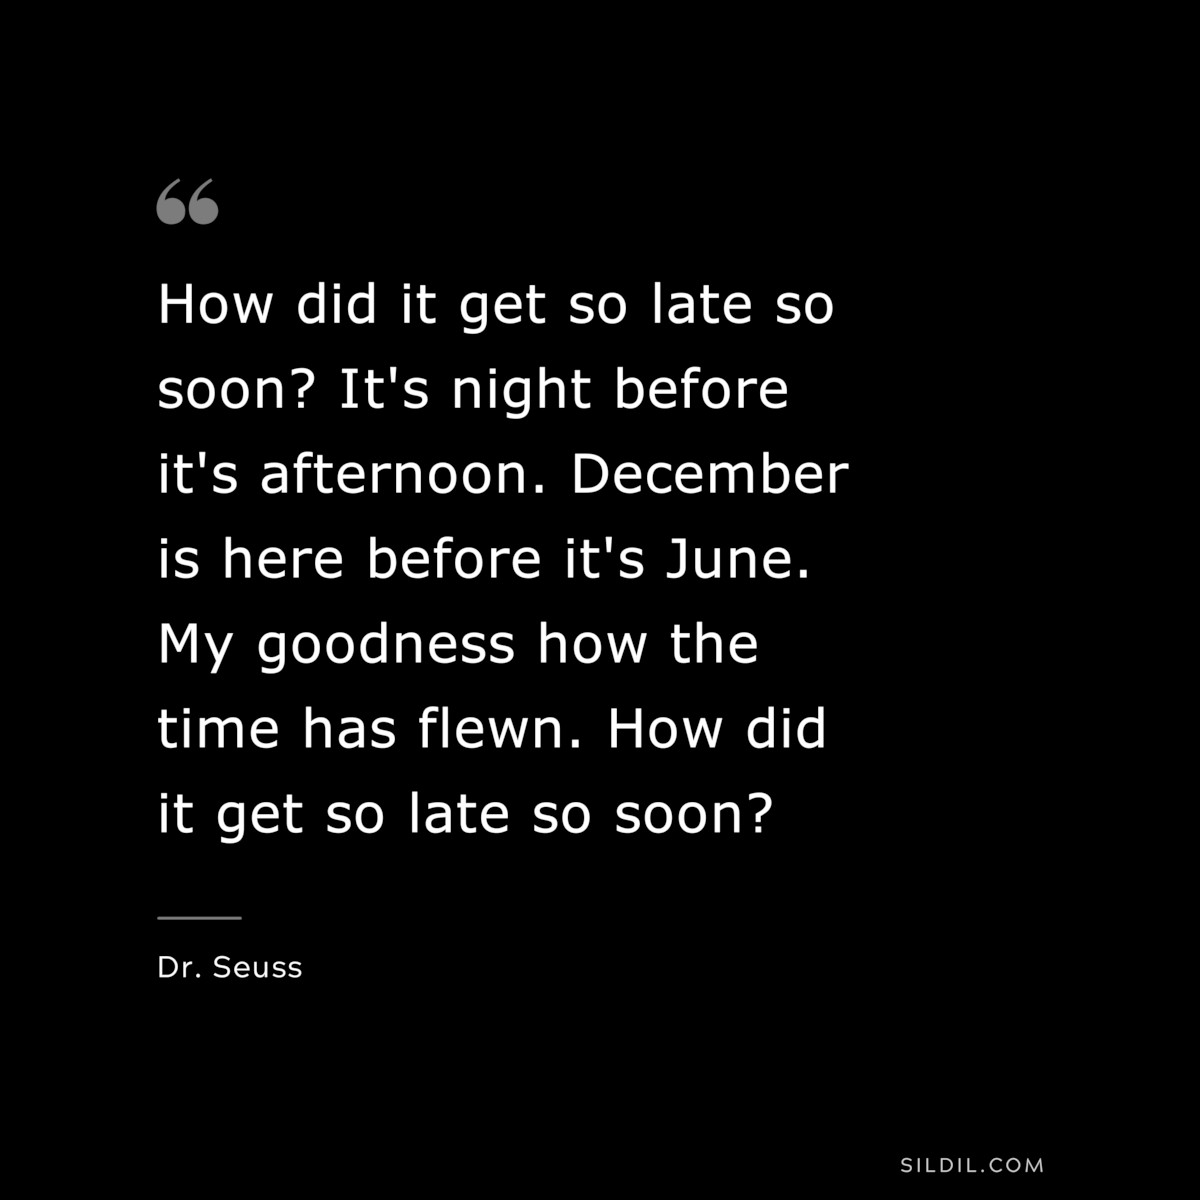 How did it get so late so soon? It's night before it's afternoon. December is here before it's June. My goodness how the time has flewn. How did it get so late so soon? ― Dr. Seuss